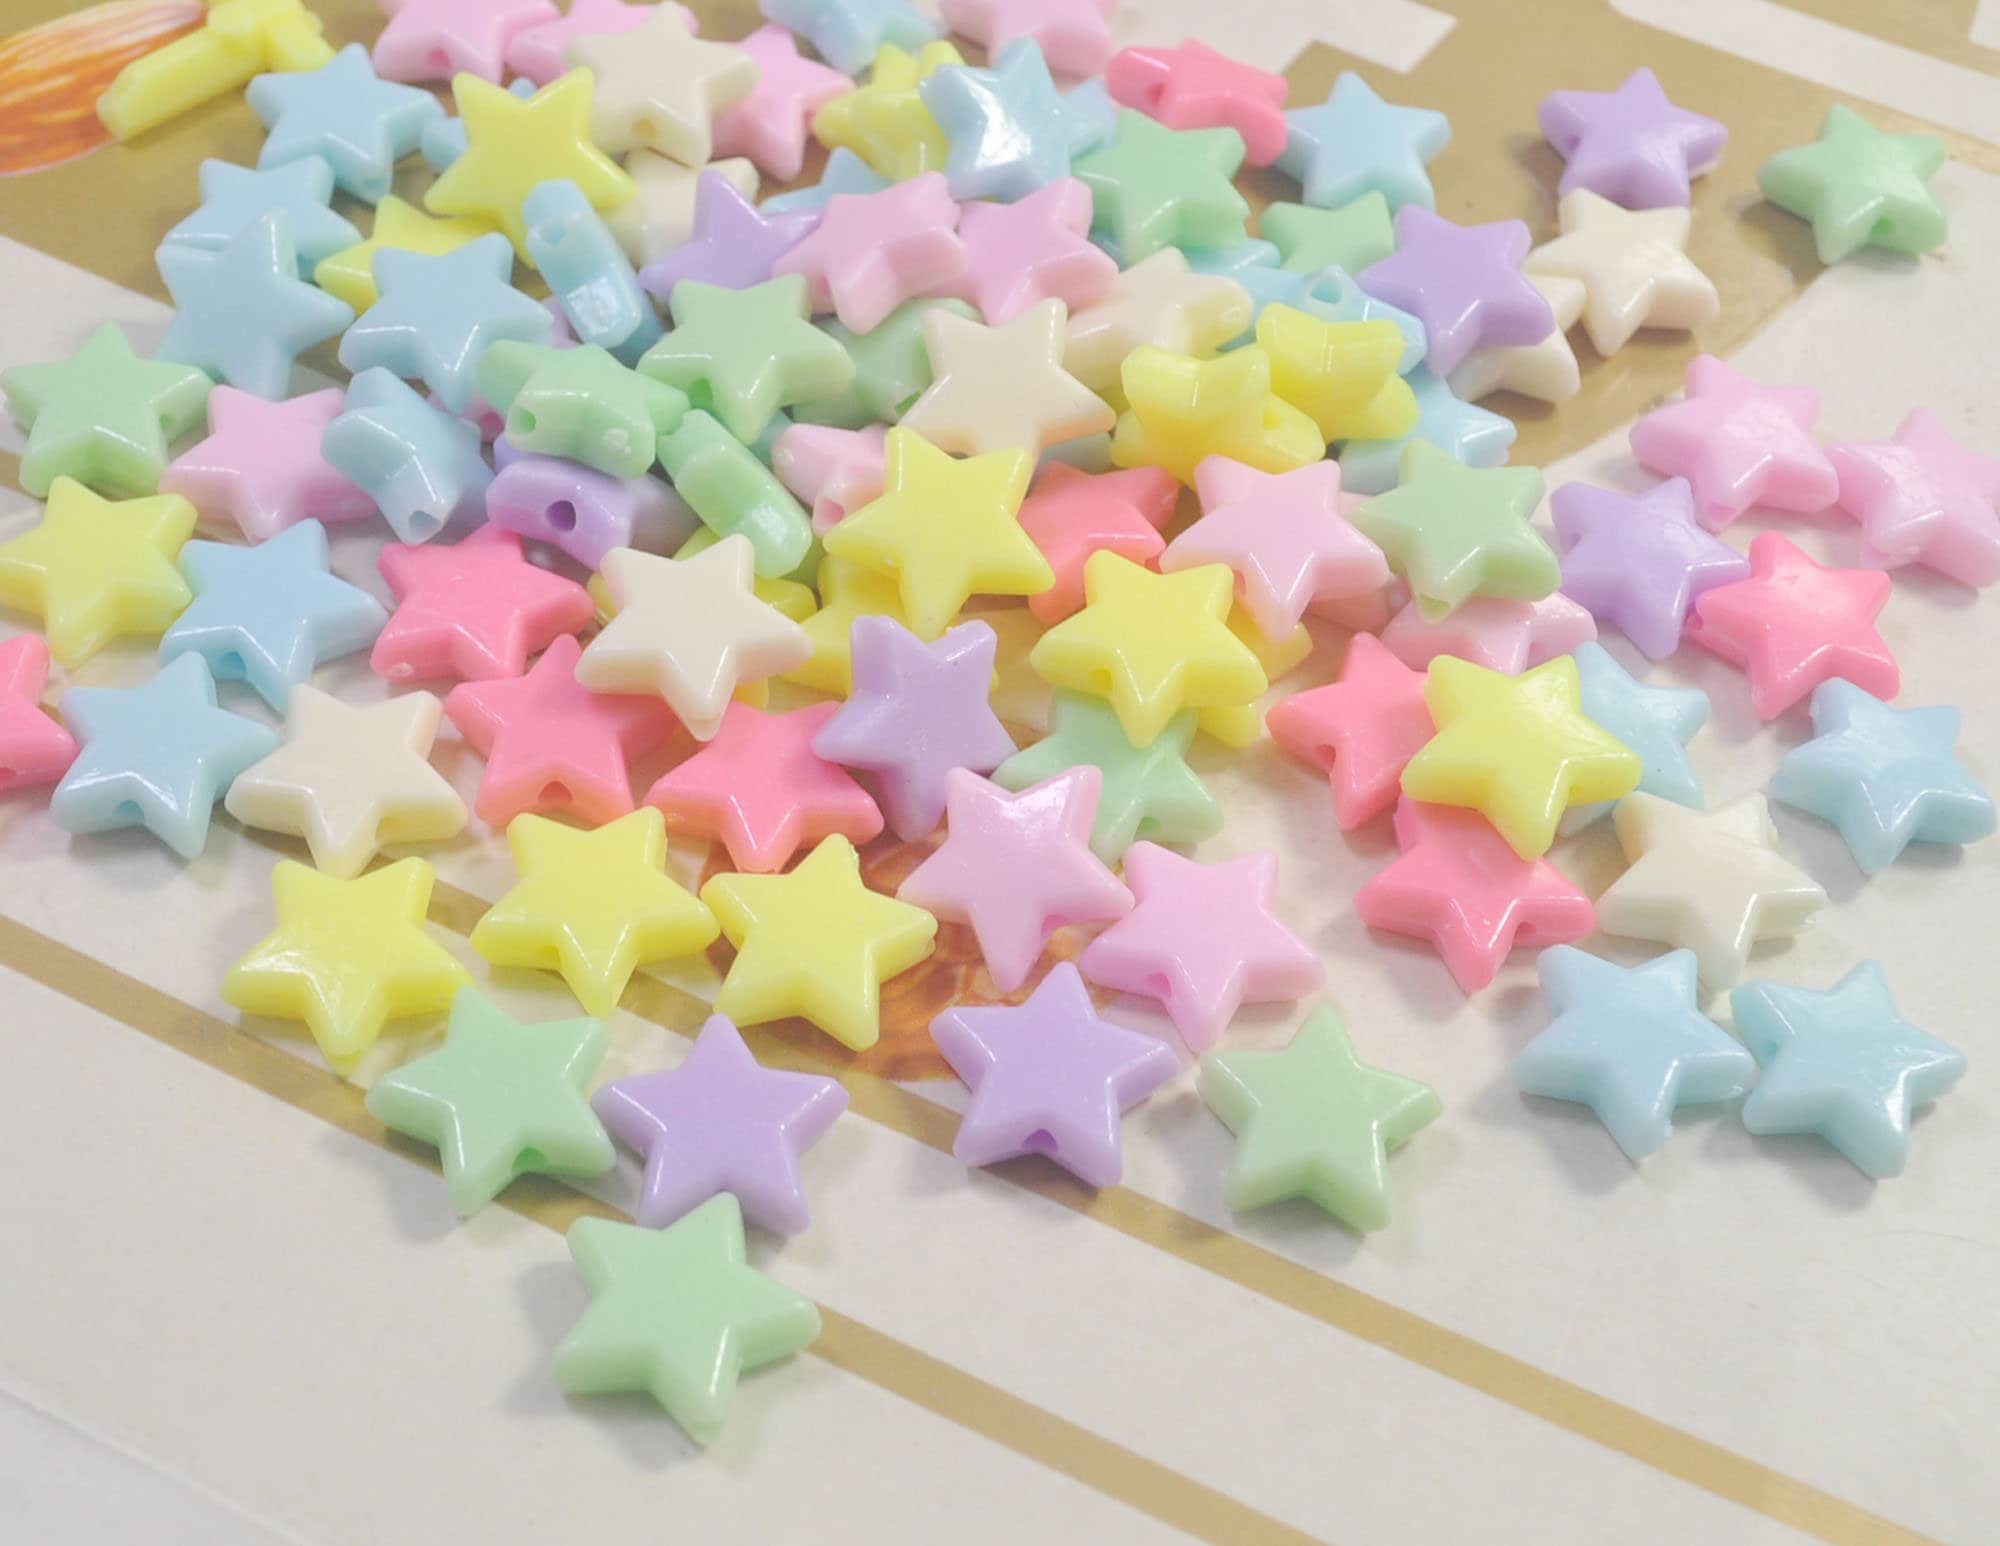 Plastic Star Beads 14mm Small Flat Bright Color Plastic Stars Resin or  Acrylic Beads 80 Pc Set 